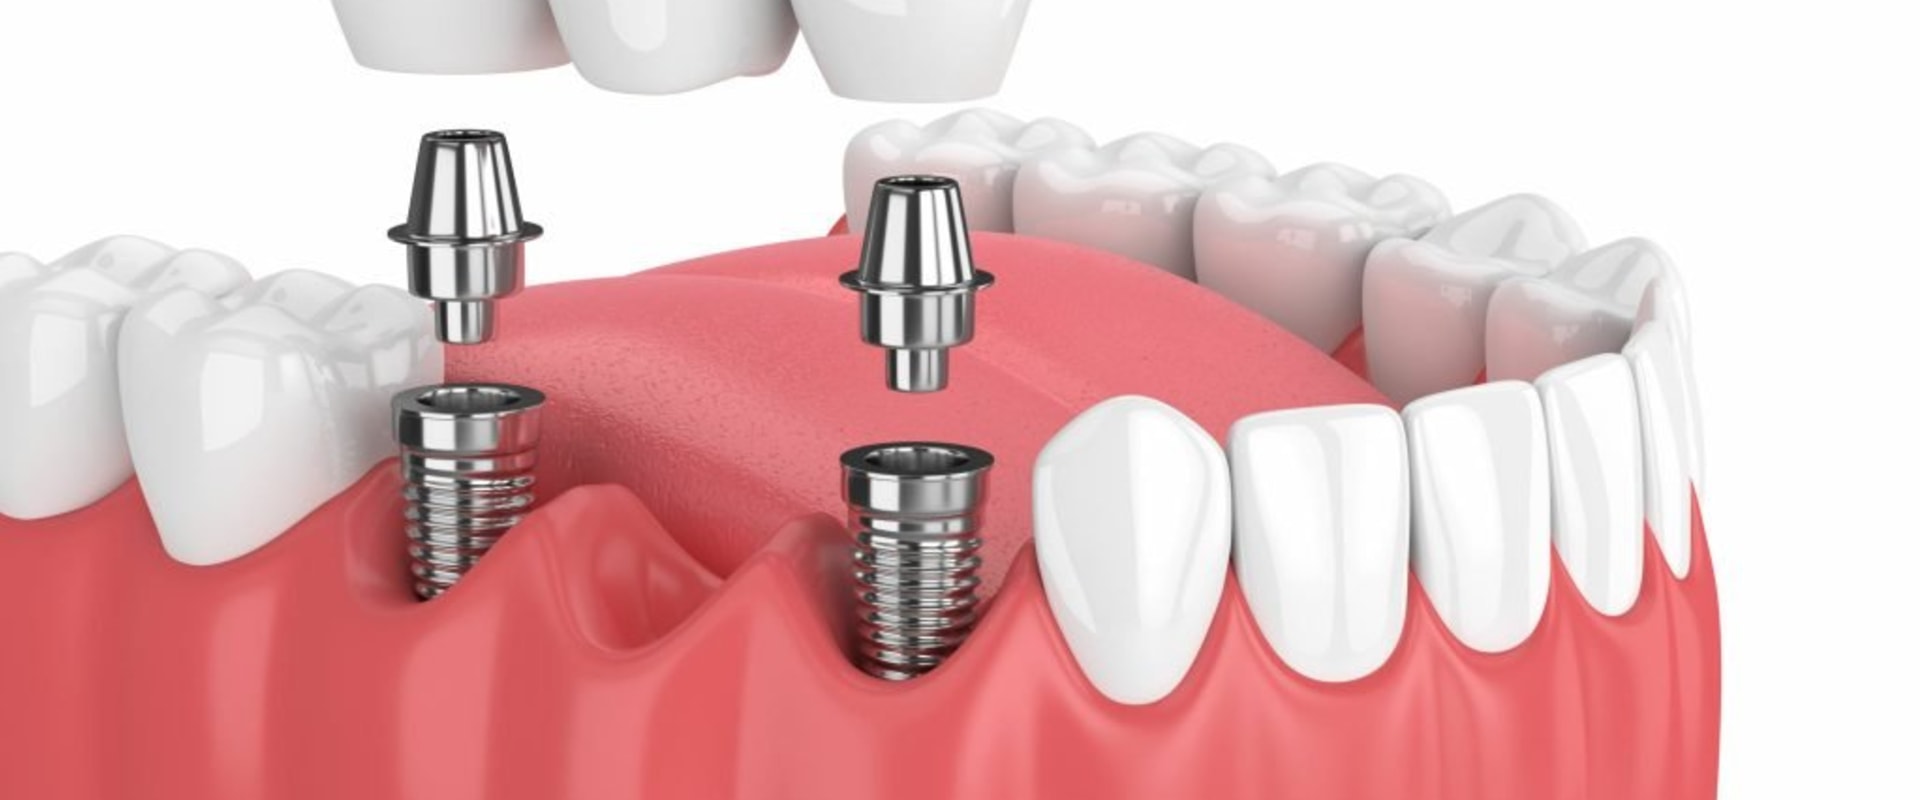 The Benefits of Dental Implants: Improving Your Oral Health and Saving Money